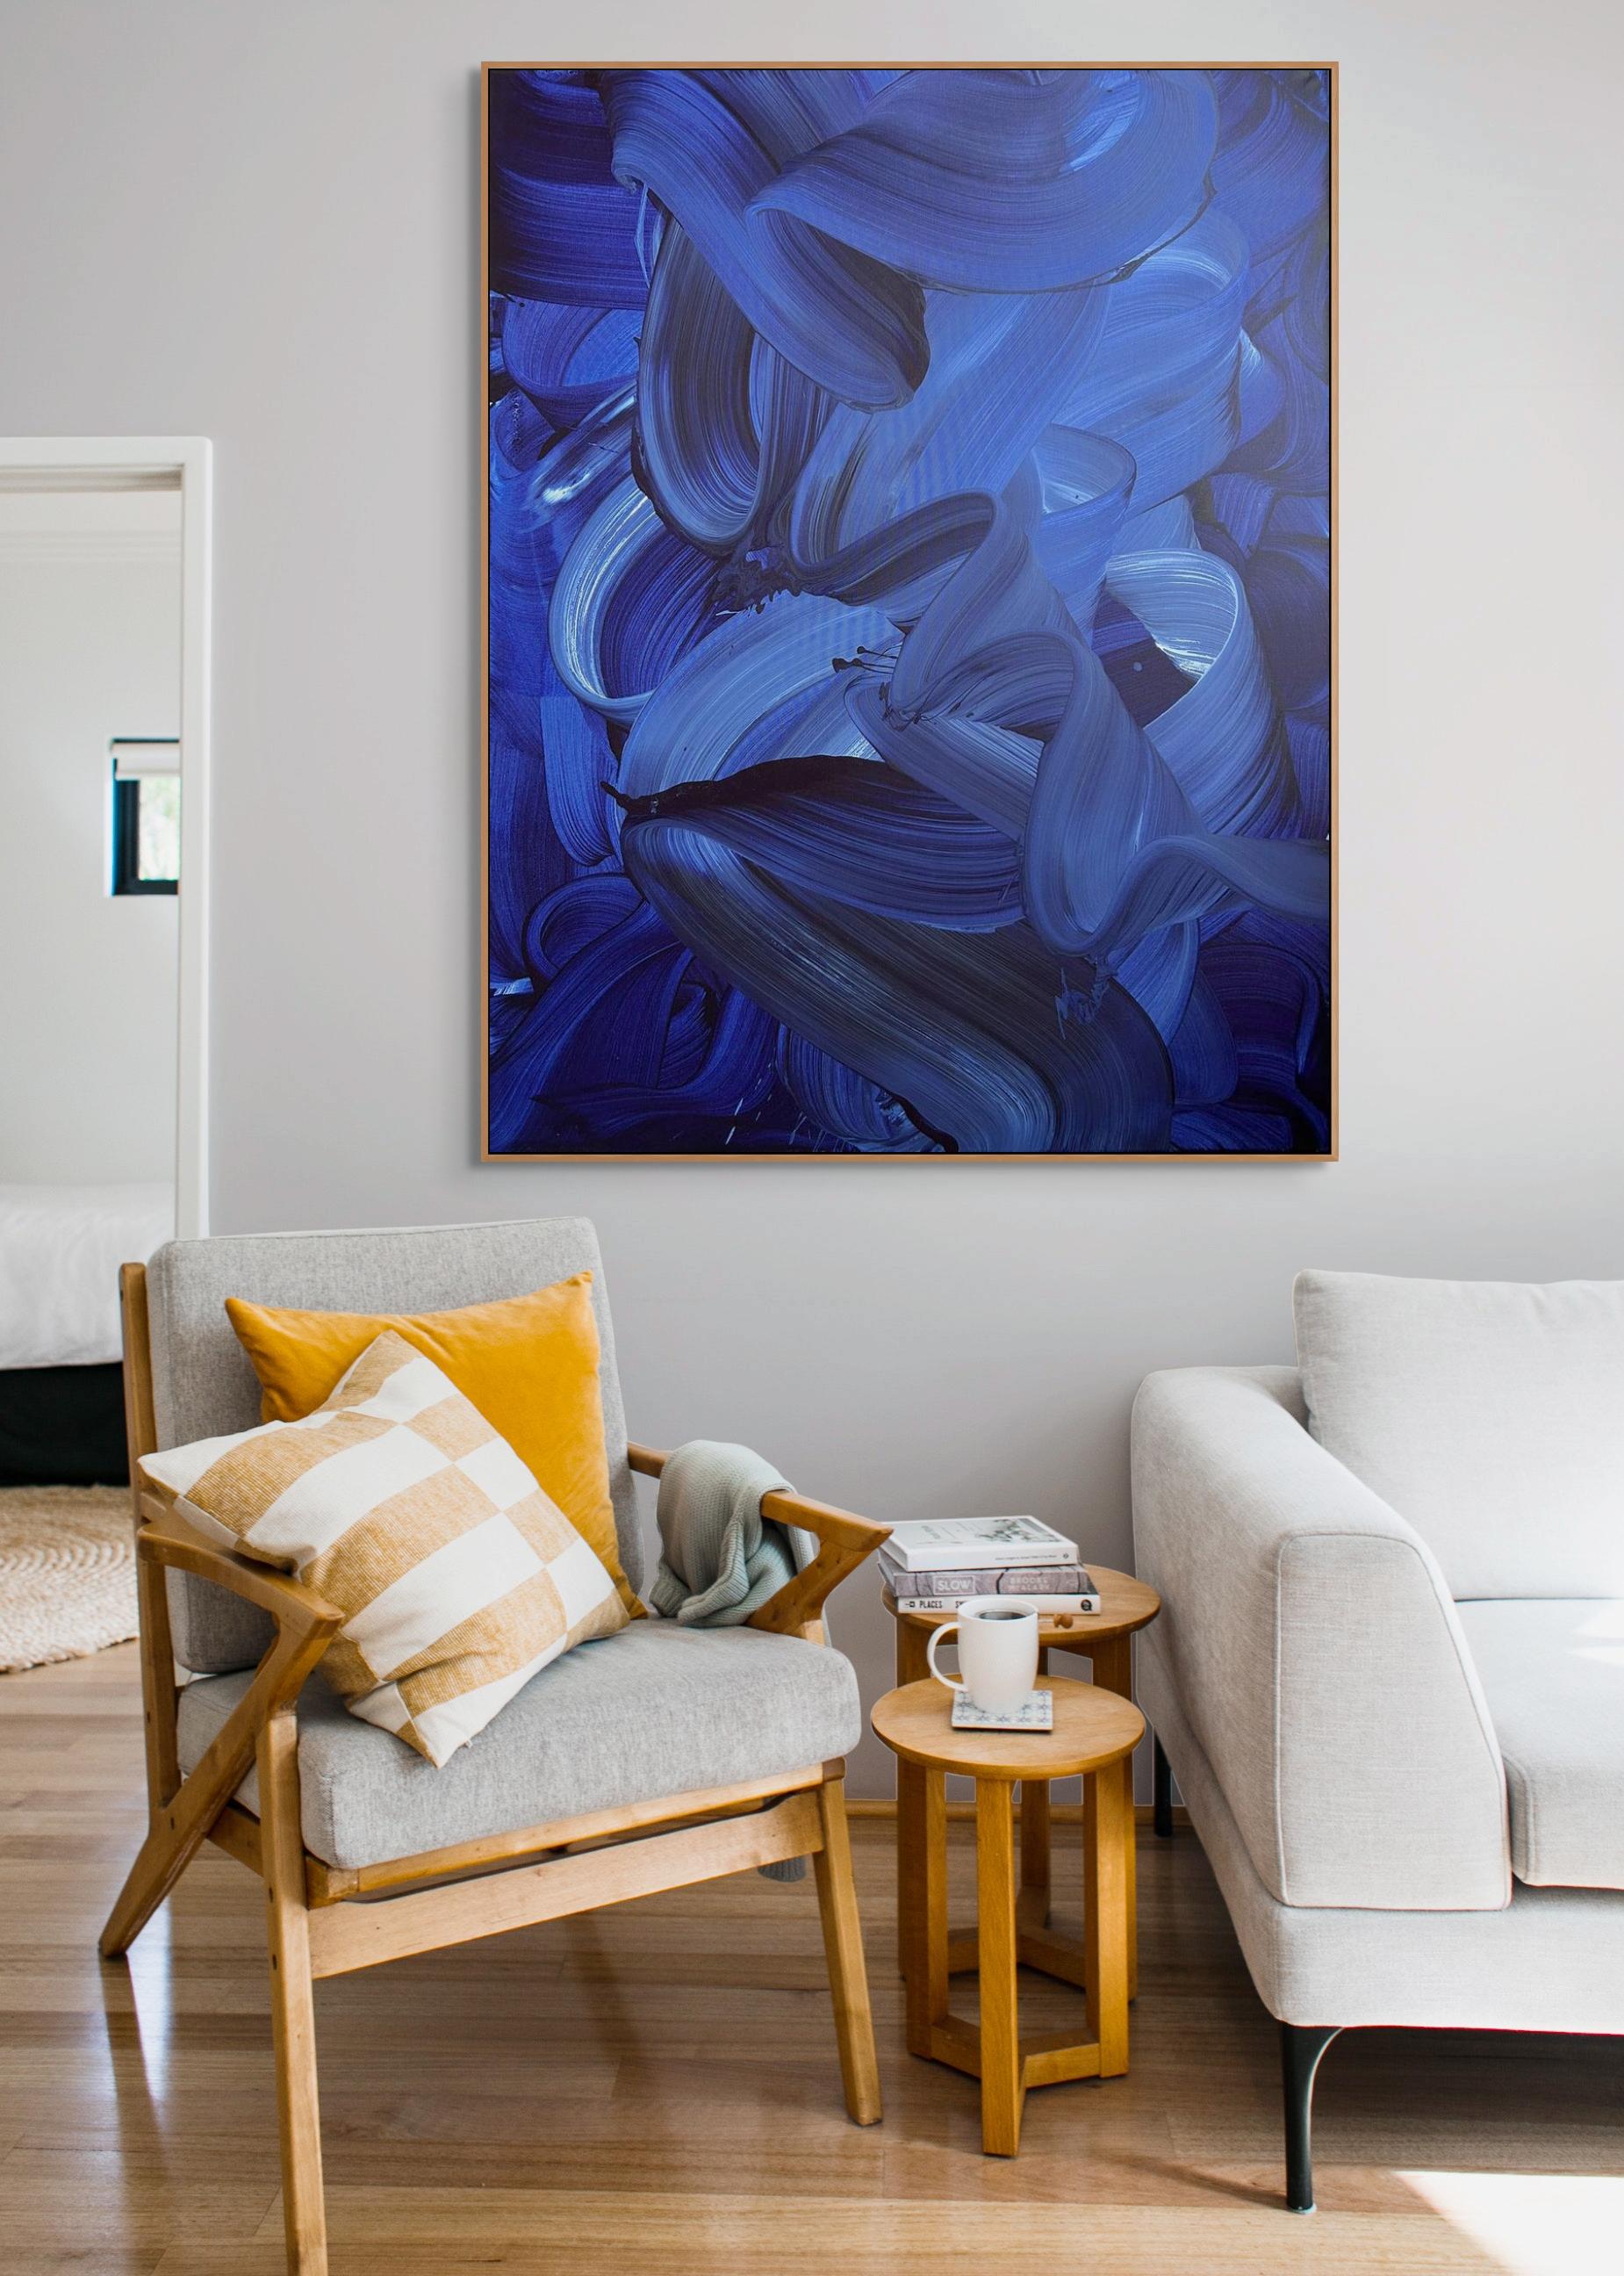 The waves have heard of you (Abstract painting)
Acrylic on canvas — Unframed
This work is exclusive to IdeelArt.

This artwork will be shipped rolled in a dent-resistant tube.
This method is especially safe for large works, and provides lower